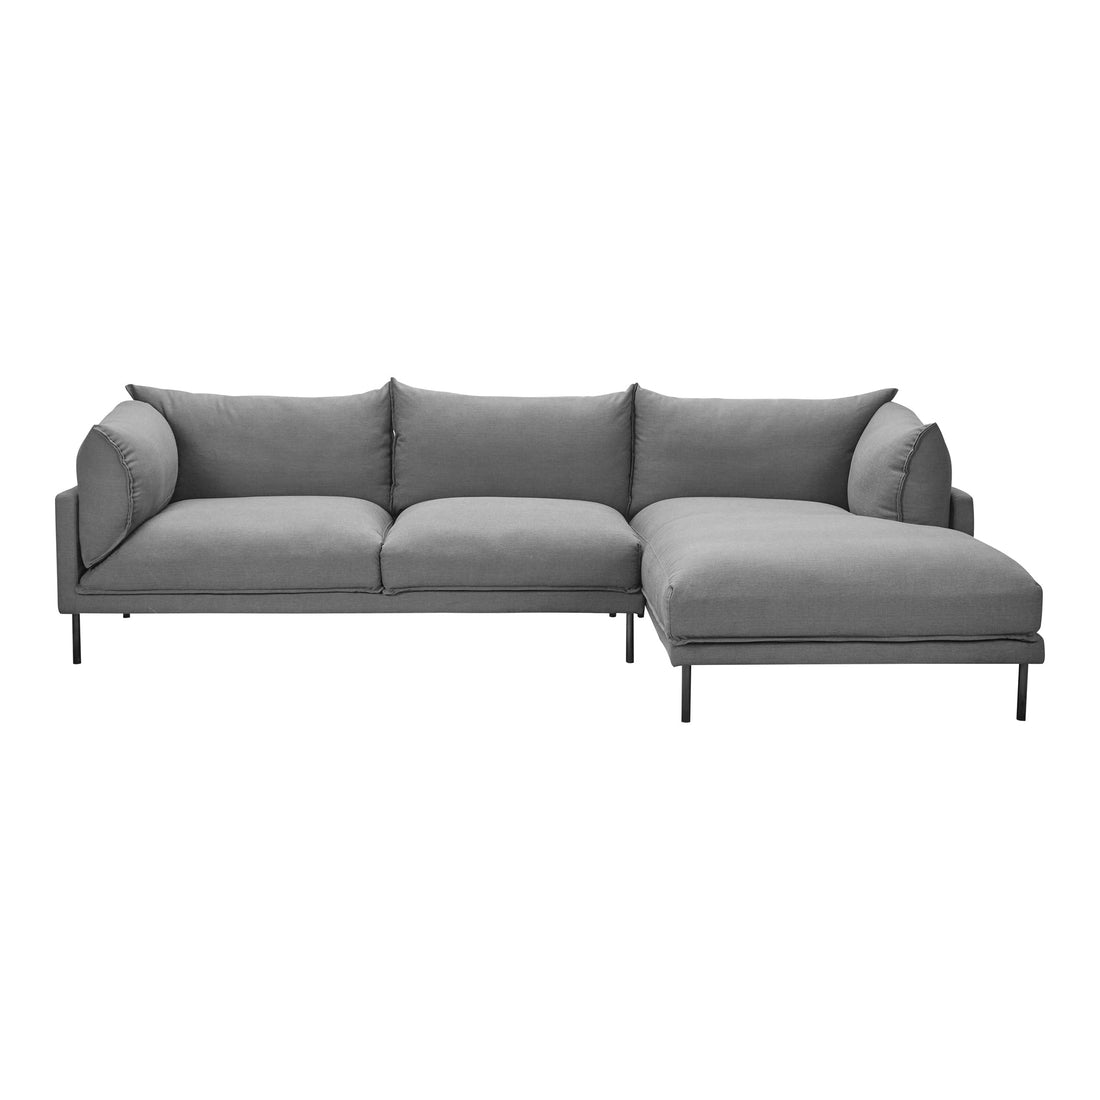 Sectional Charcoal: Chic and Cozy Charcoal Sectional